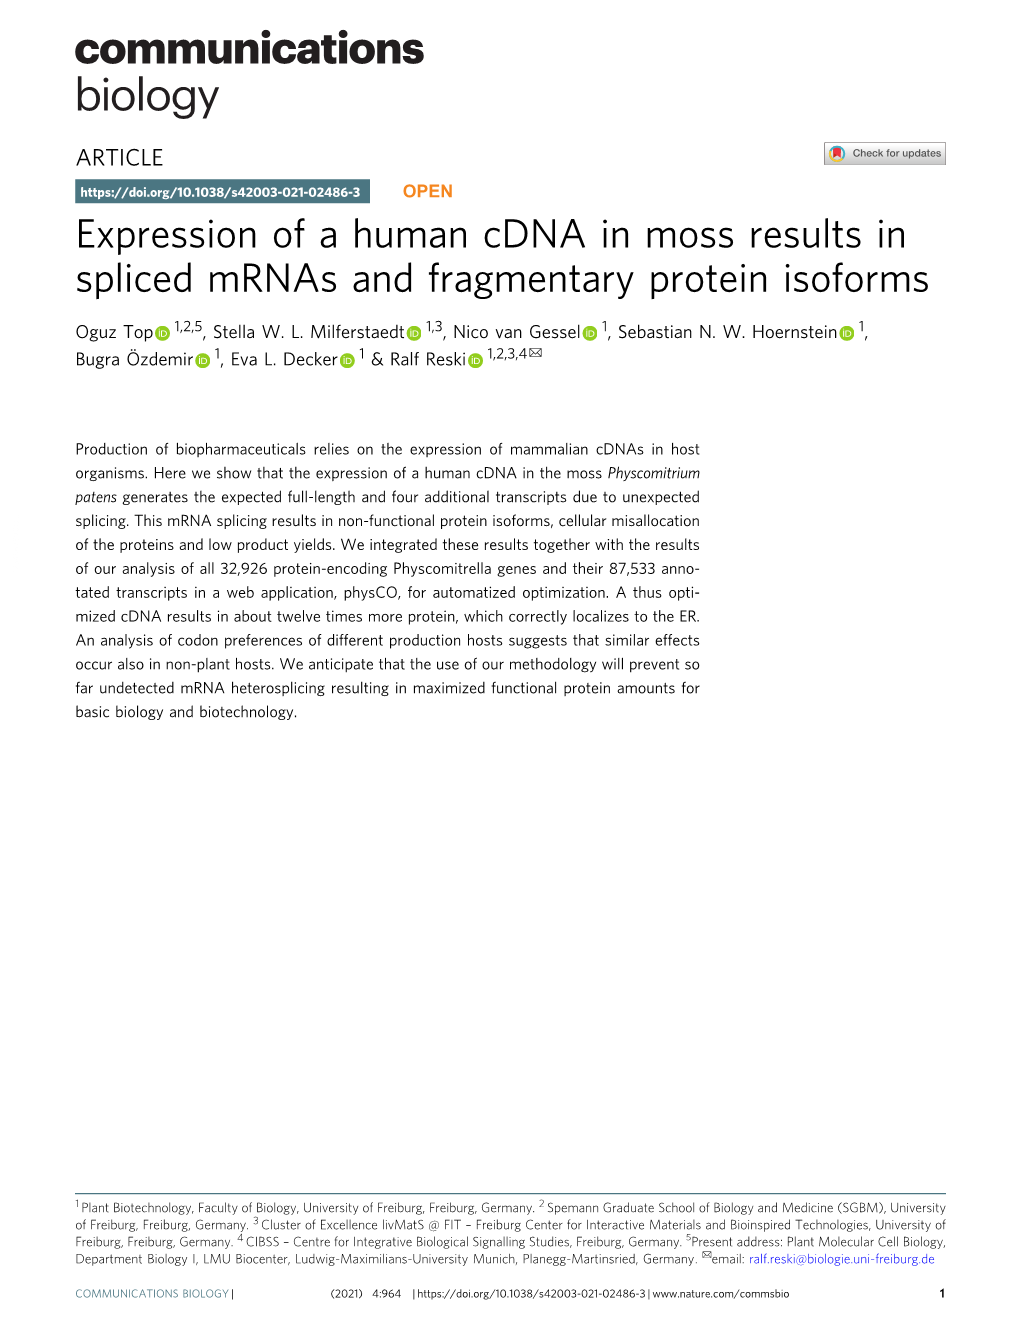 Expression of a Human Cdna in Moss Results in Spliced Mrnas and Fragmentary Protein Isoforms